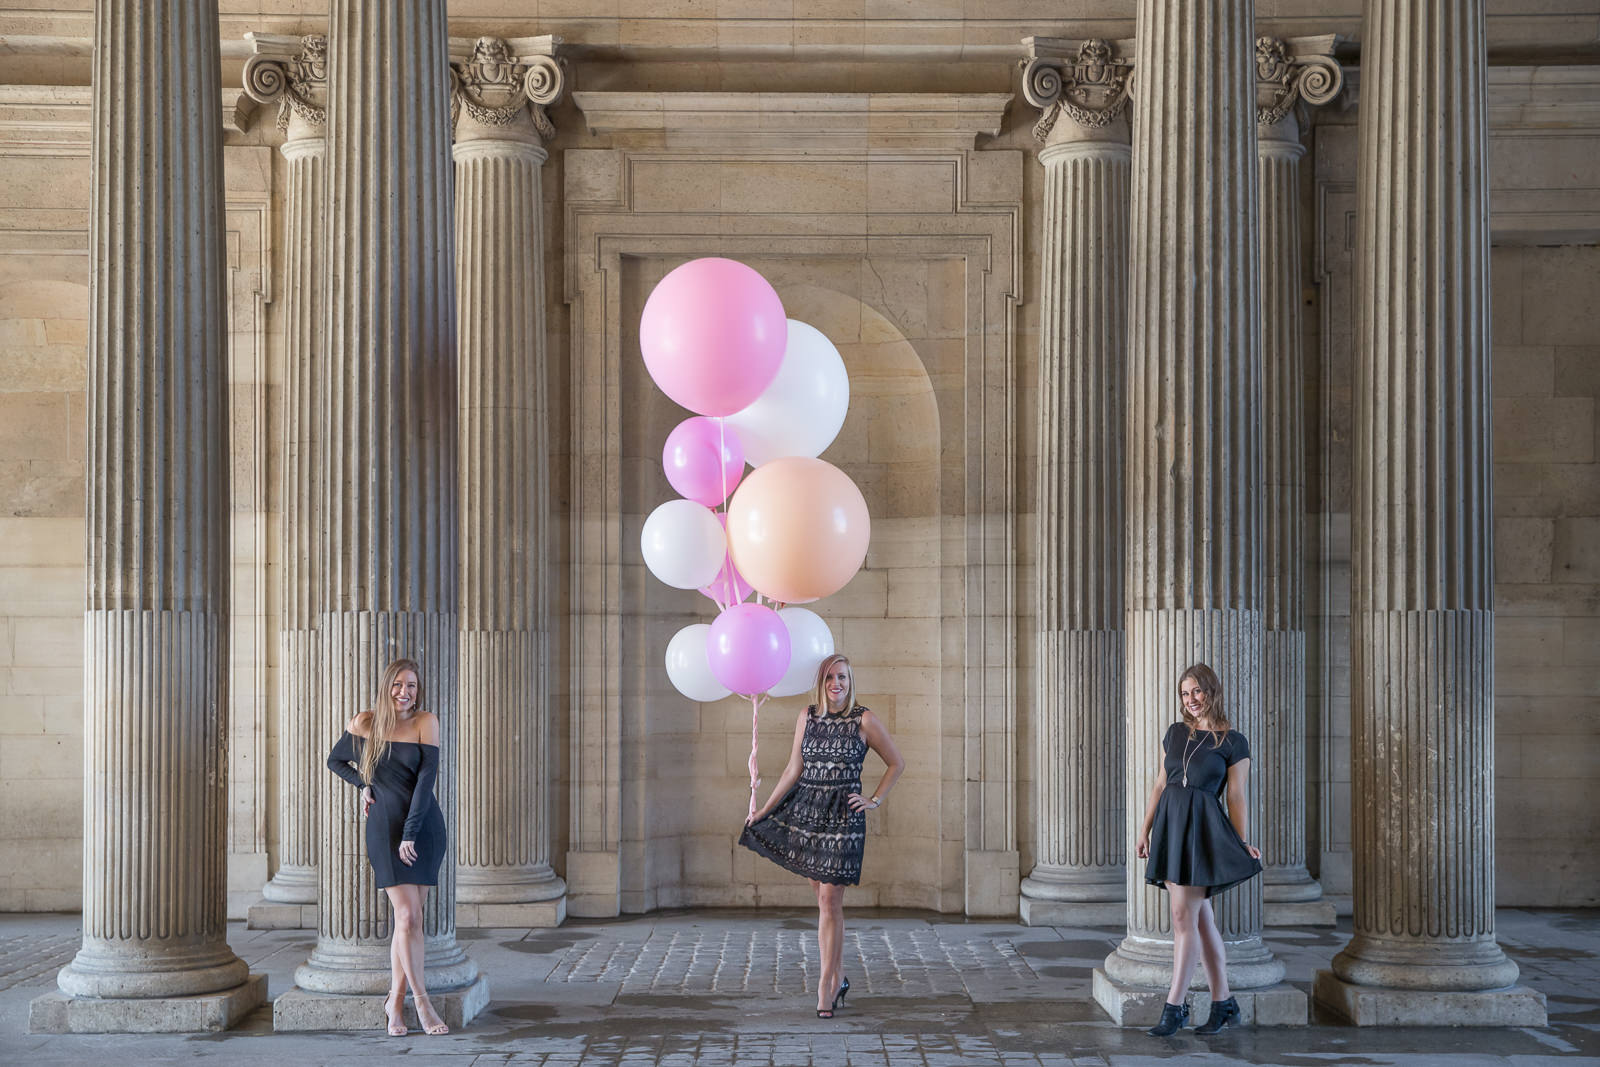 Paris family photos 3 sisters with pink and white balloons